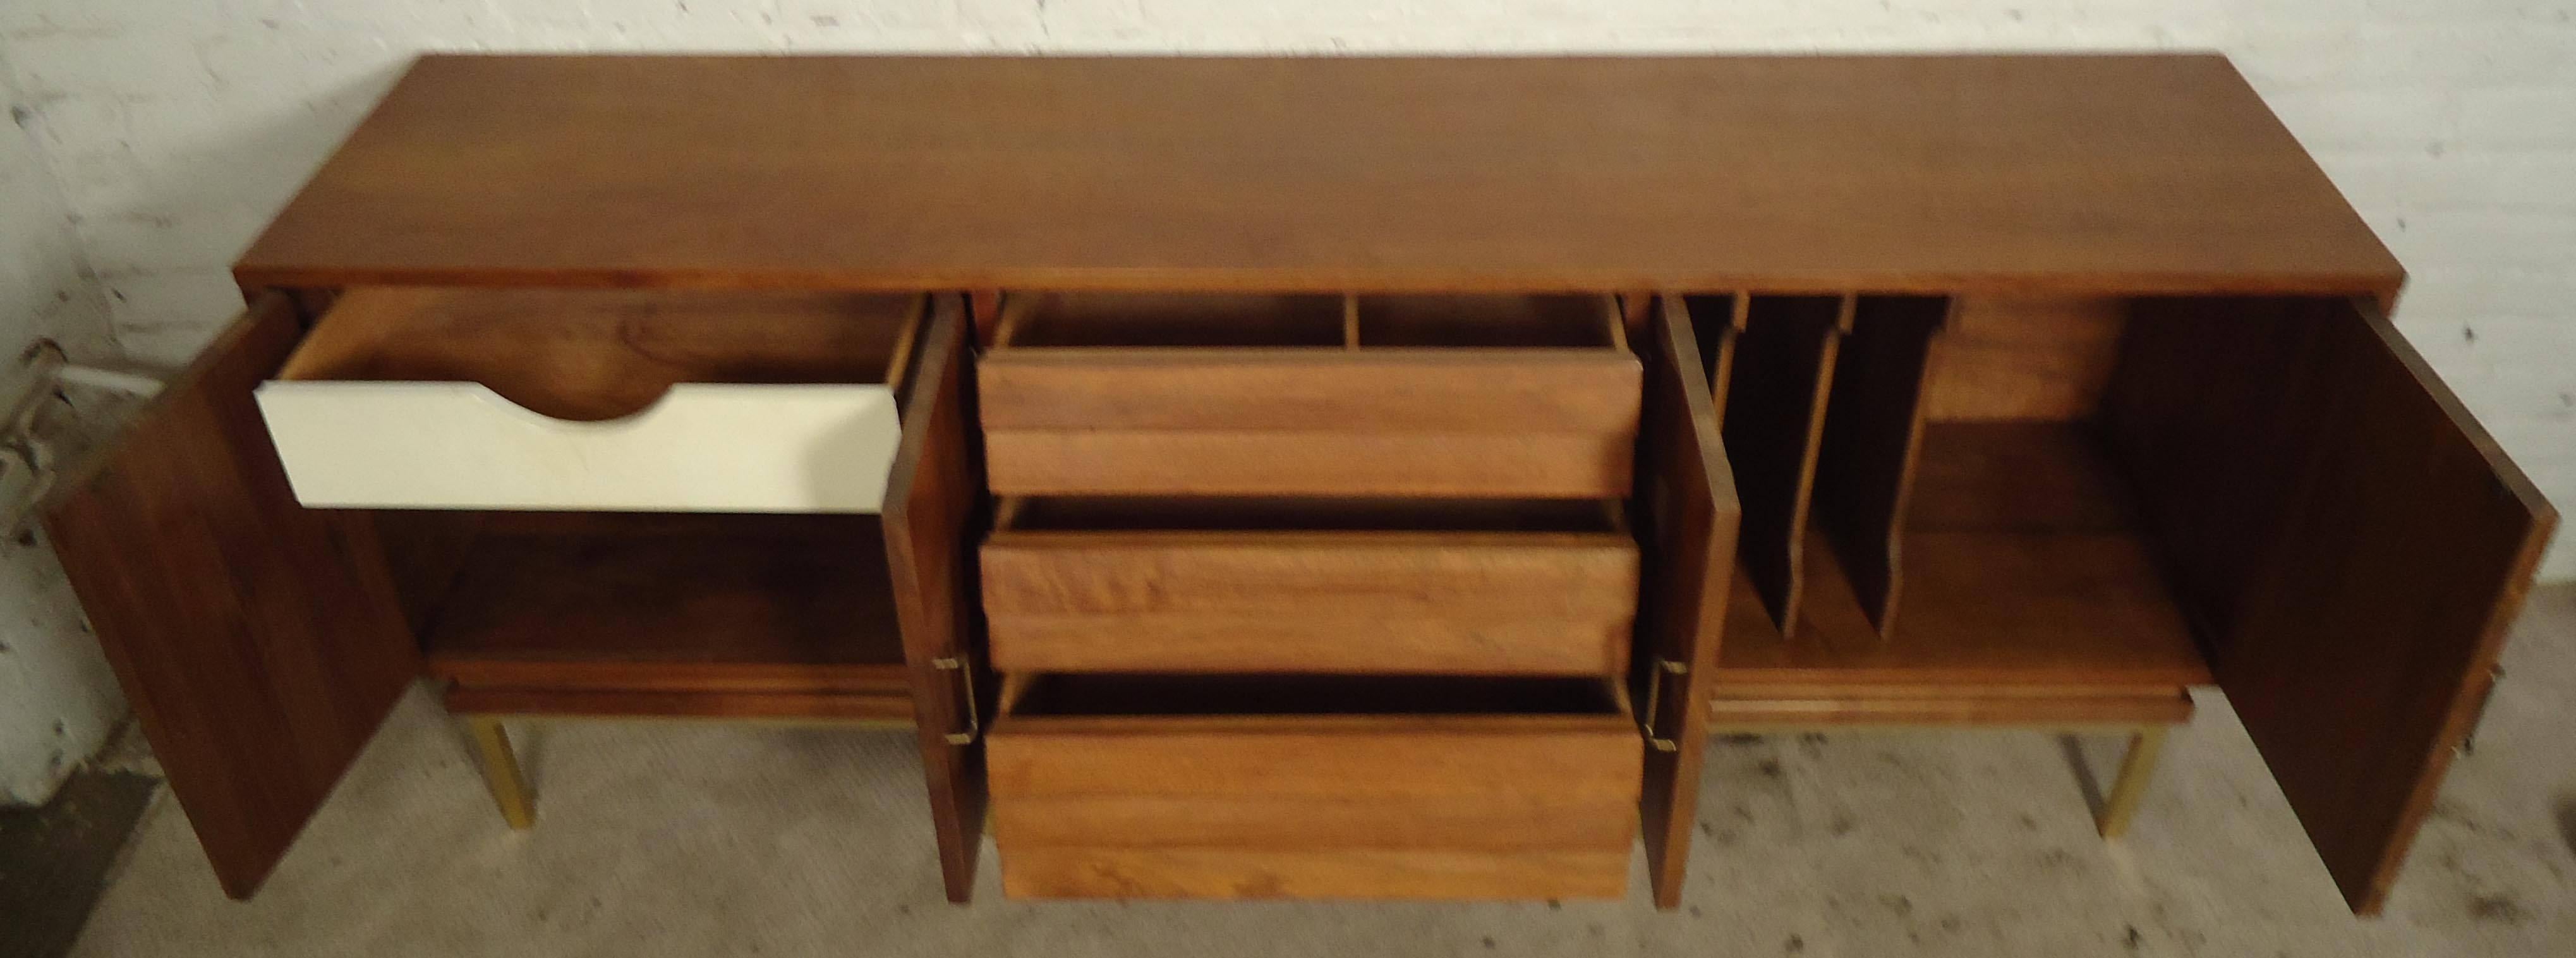 Vintage-modern American Of Martinsville credenza, features three beveled center drawers and two cabinets with sculpted brass handles and legs. 

Please confirm item location NY or NJ with dealer.